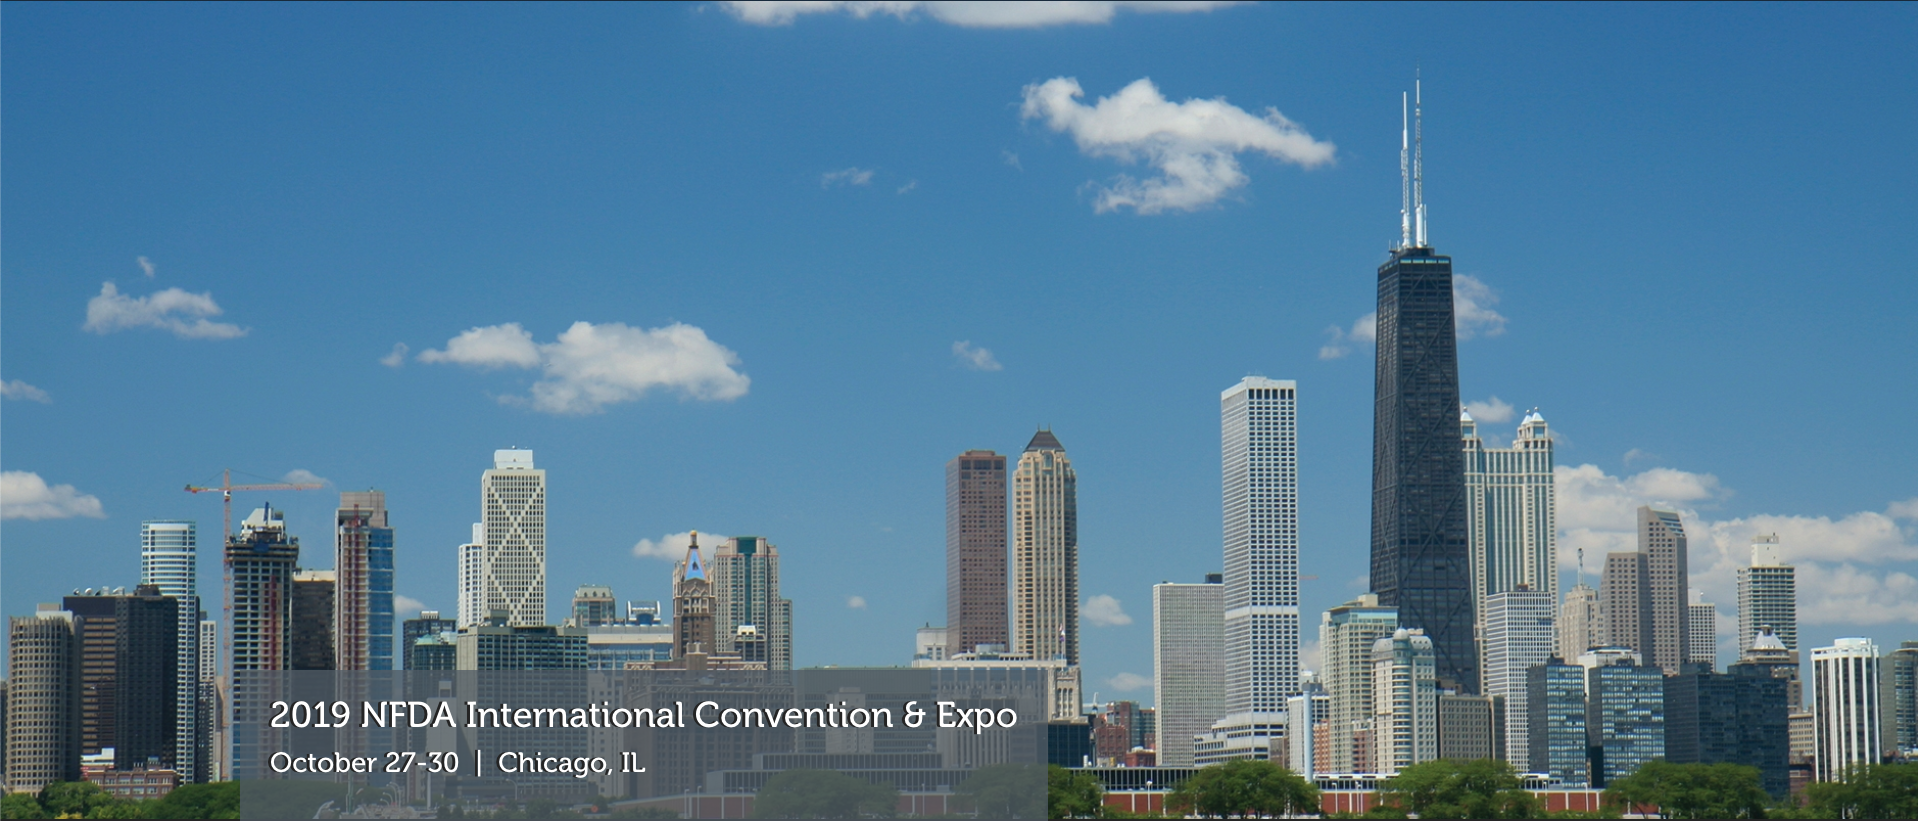 2019 NFDA International Convention & Expo: Relive the Past, Explore the Present, Focus on Your Future